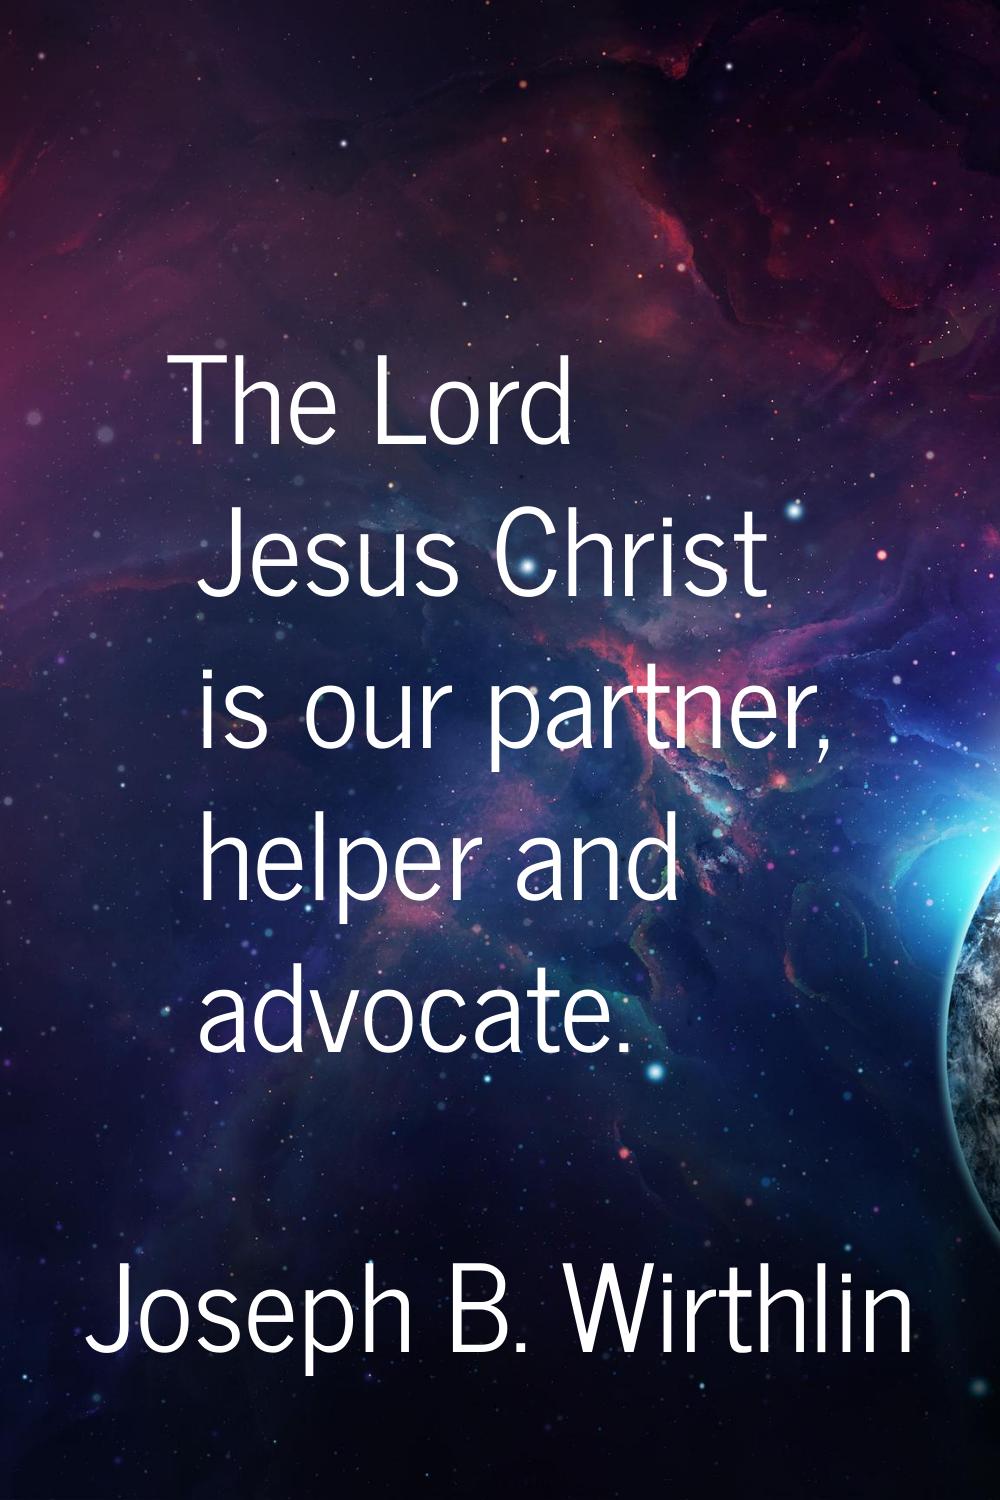 The Lord Jesus Christ is our partner, helper and advocate.